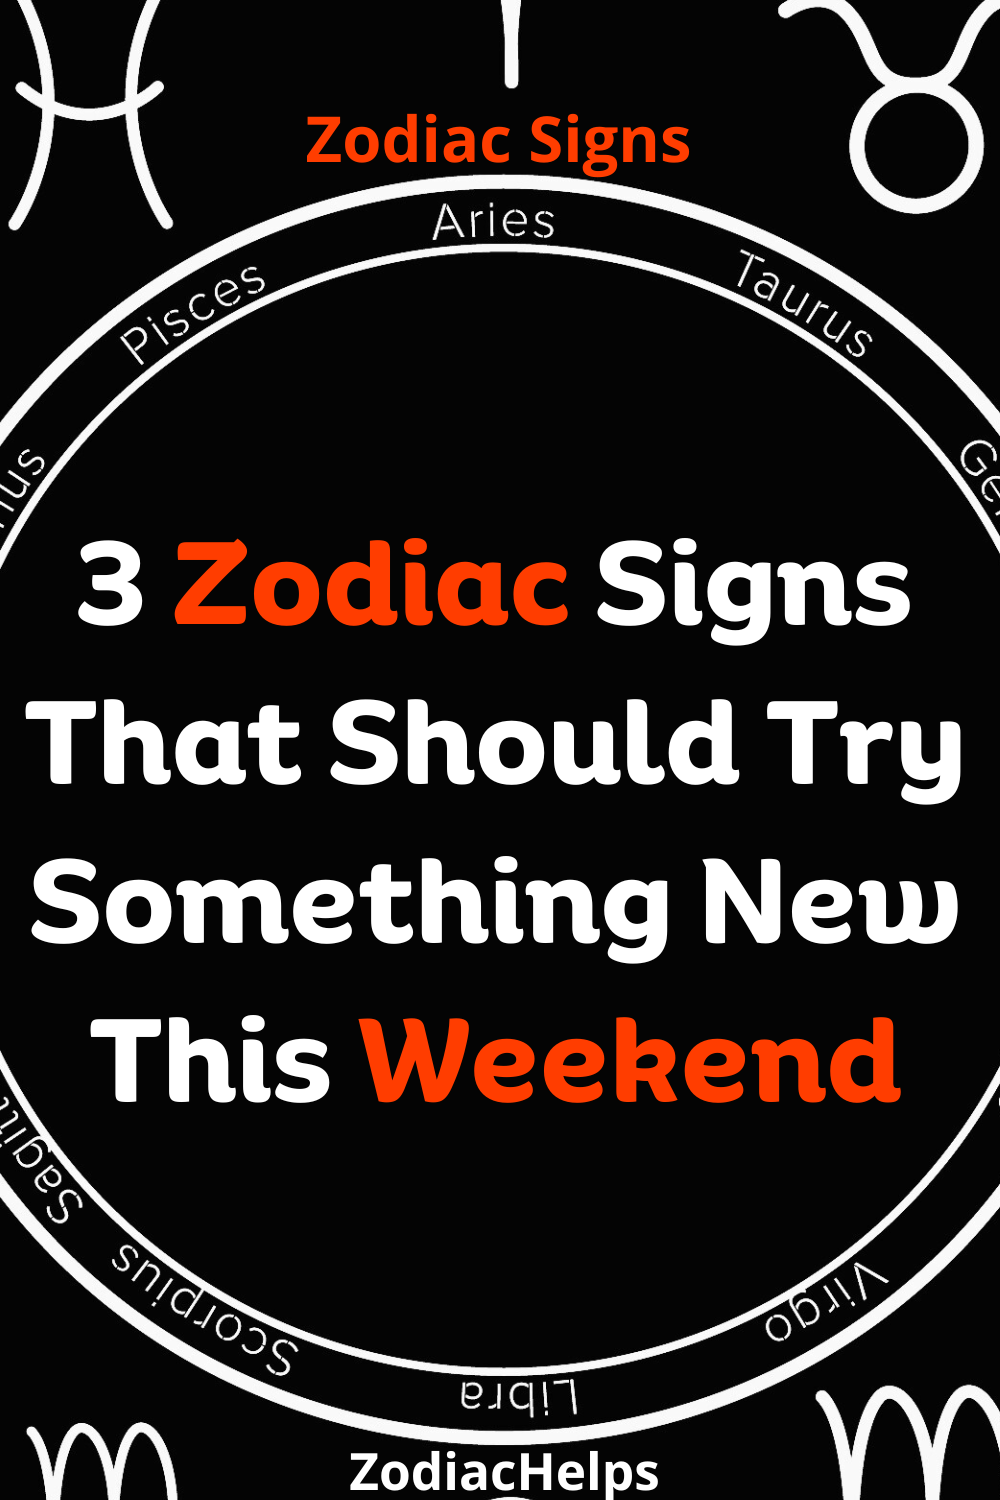 3 Zodiac Signs That Should Try Something New This Weekend